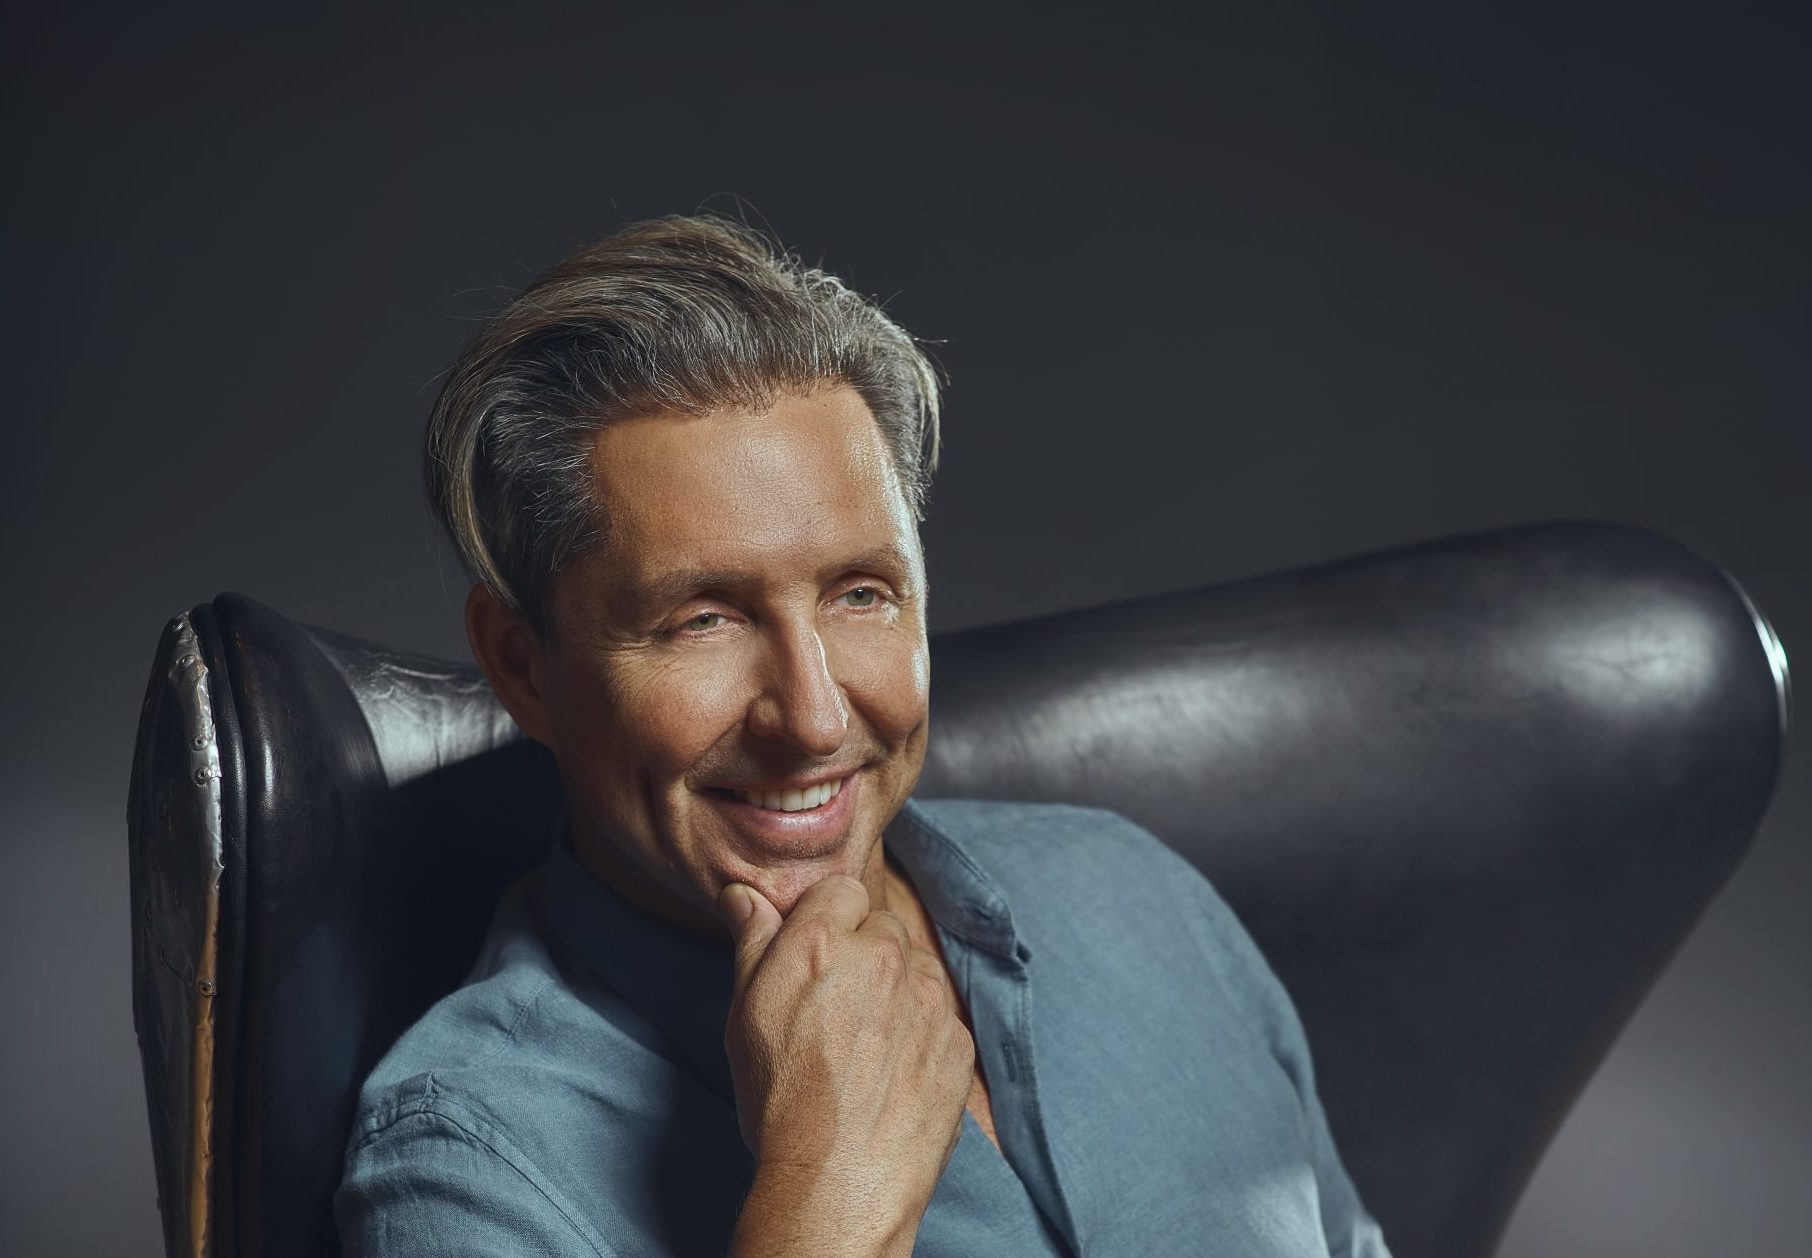 Top 5 Biohacks for Happiness & Health with Dave Asprey